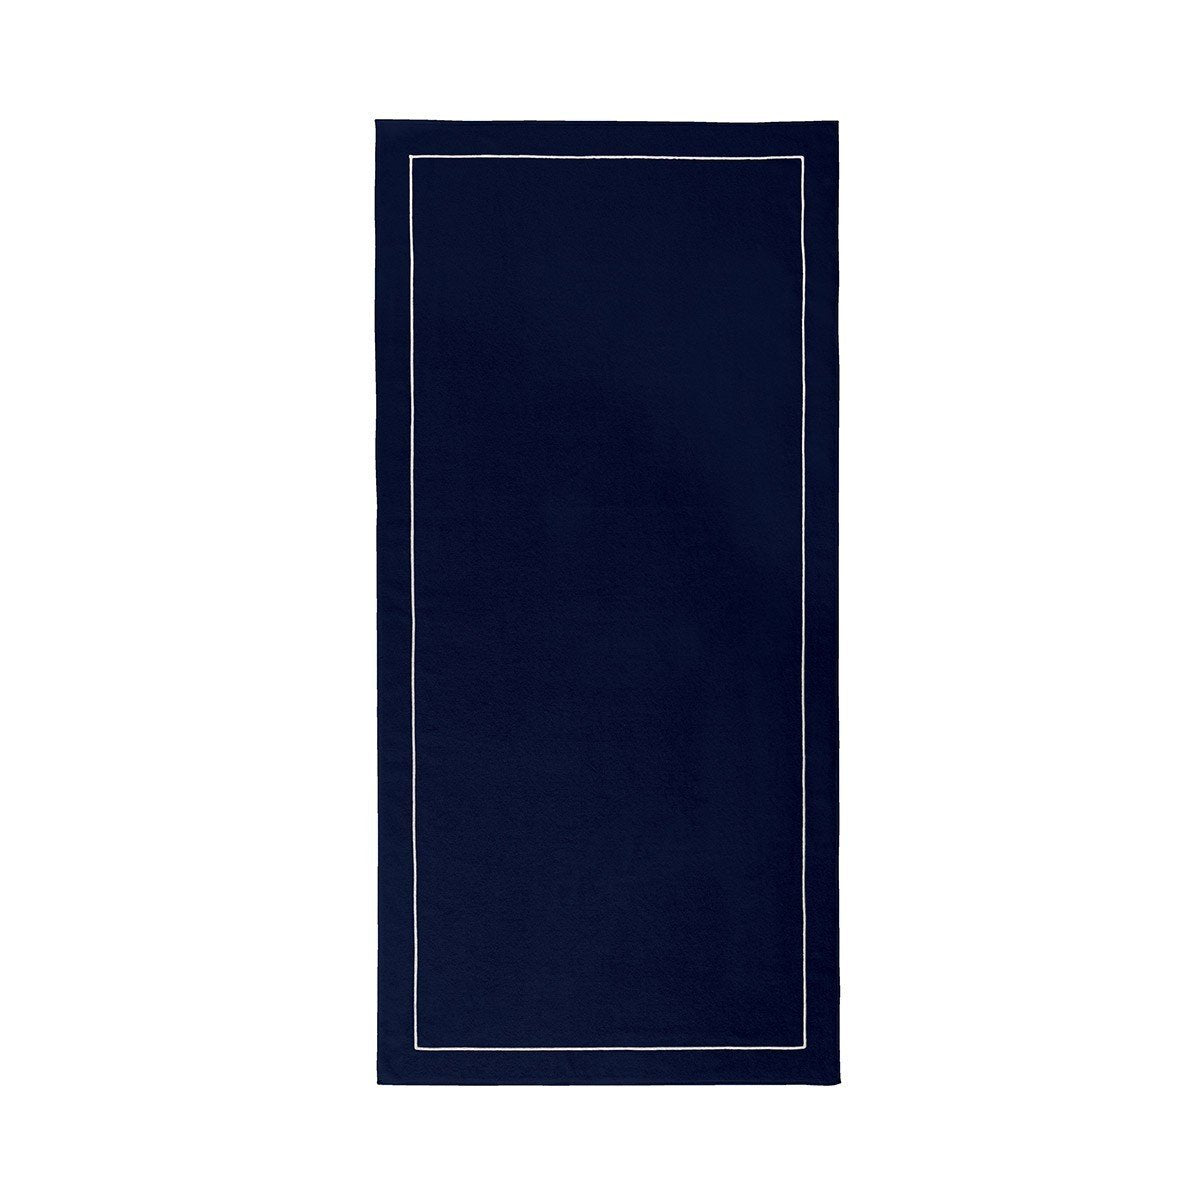 Croisiére Marine Navy Blue Beach Towel by Yves Delorme Fig Linens